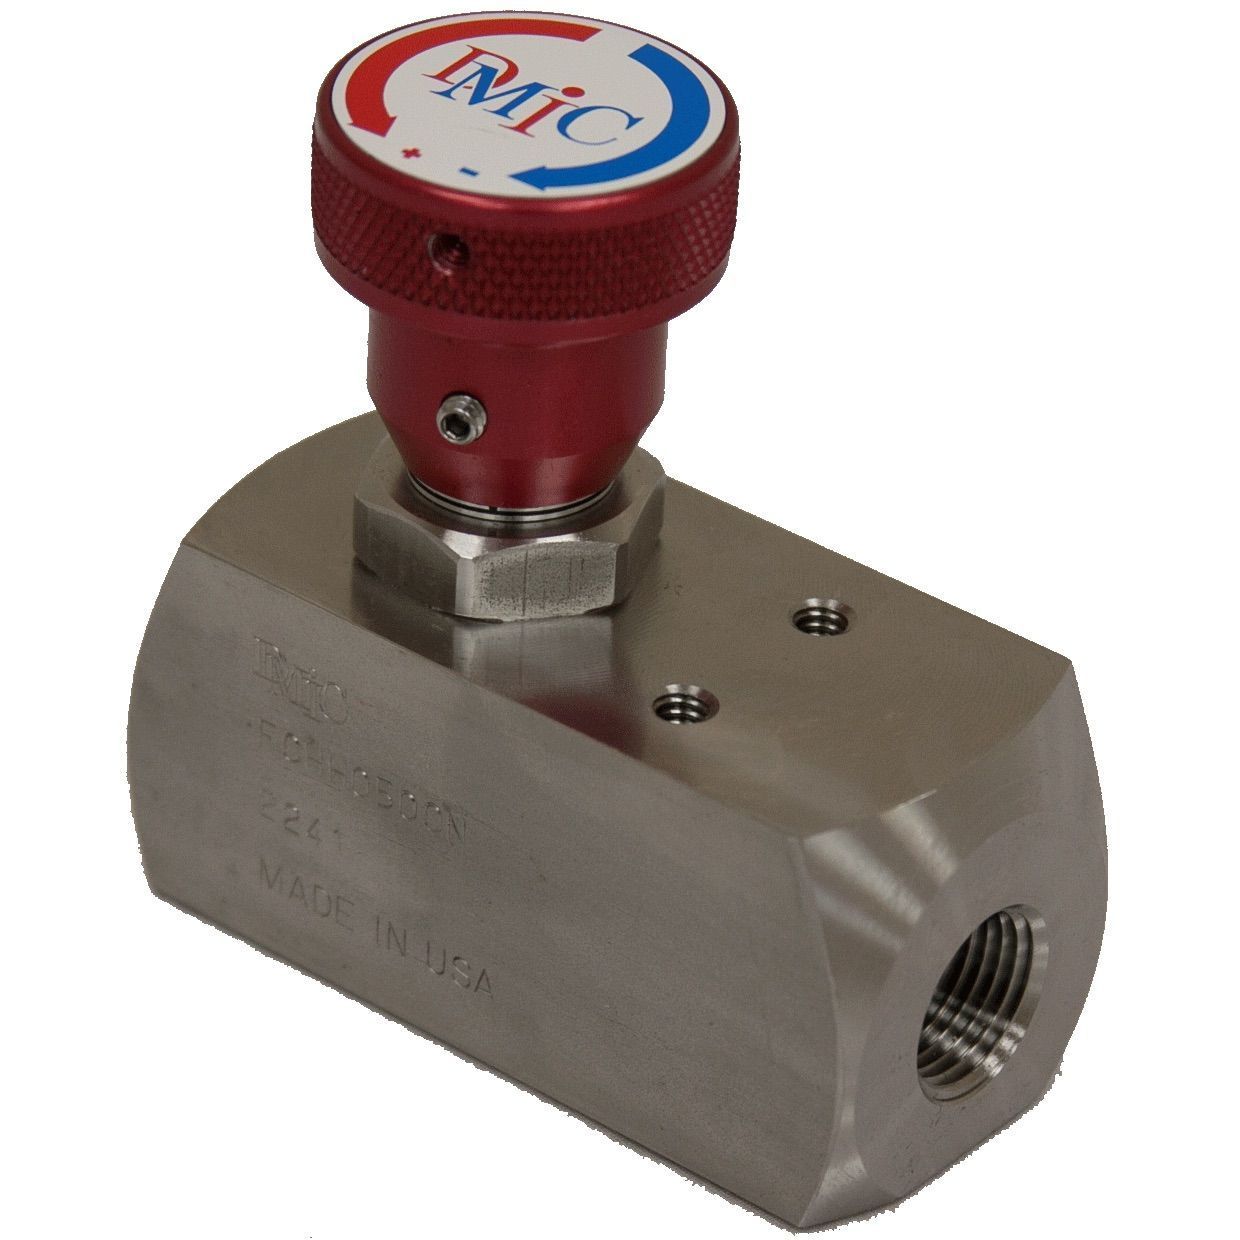 FCHH-1000N-2221 : DMIC Flow Control, Unidirectional, with Integrated Check, 1" NPT, 316SS, 10000psi